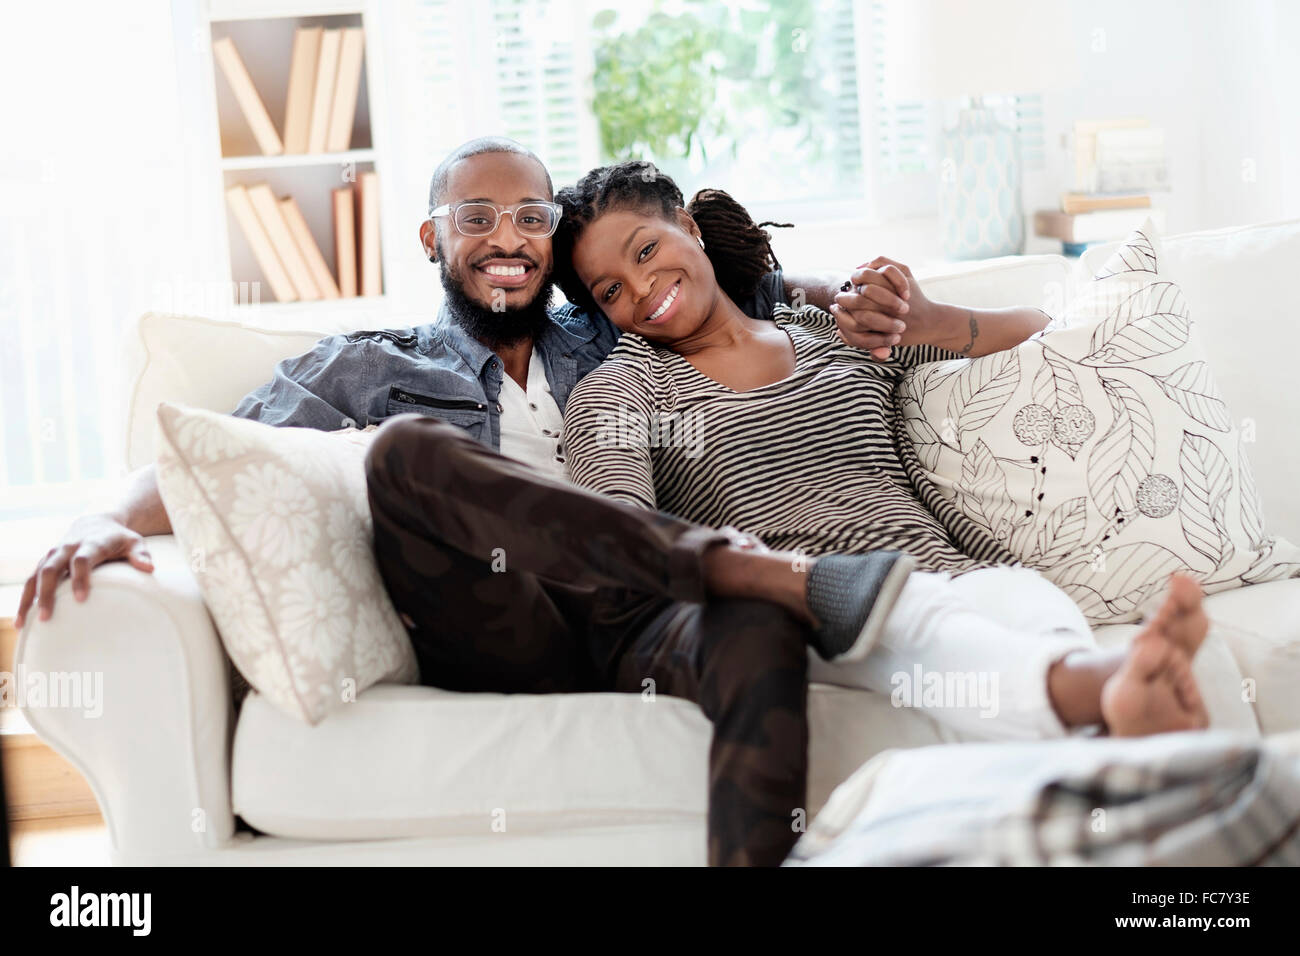 Black couple smiling on sofa Banque D'Images